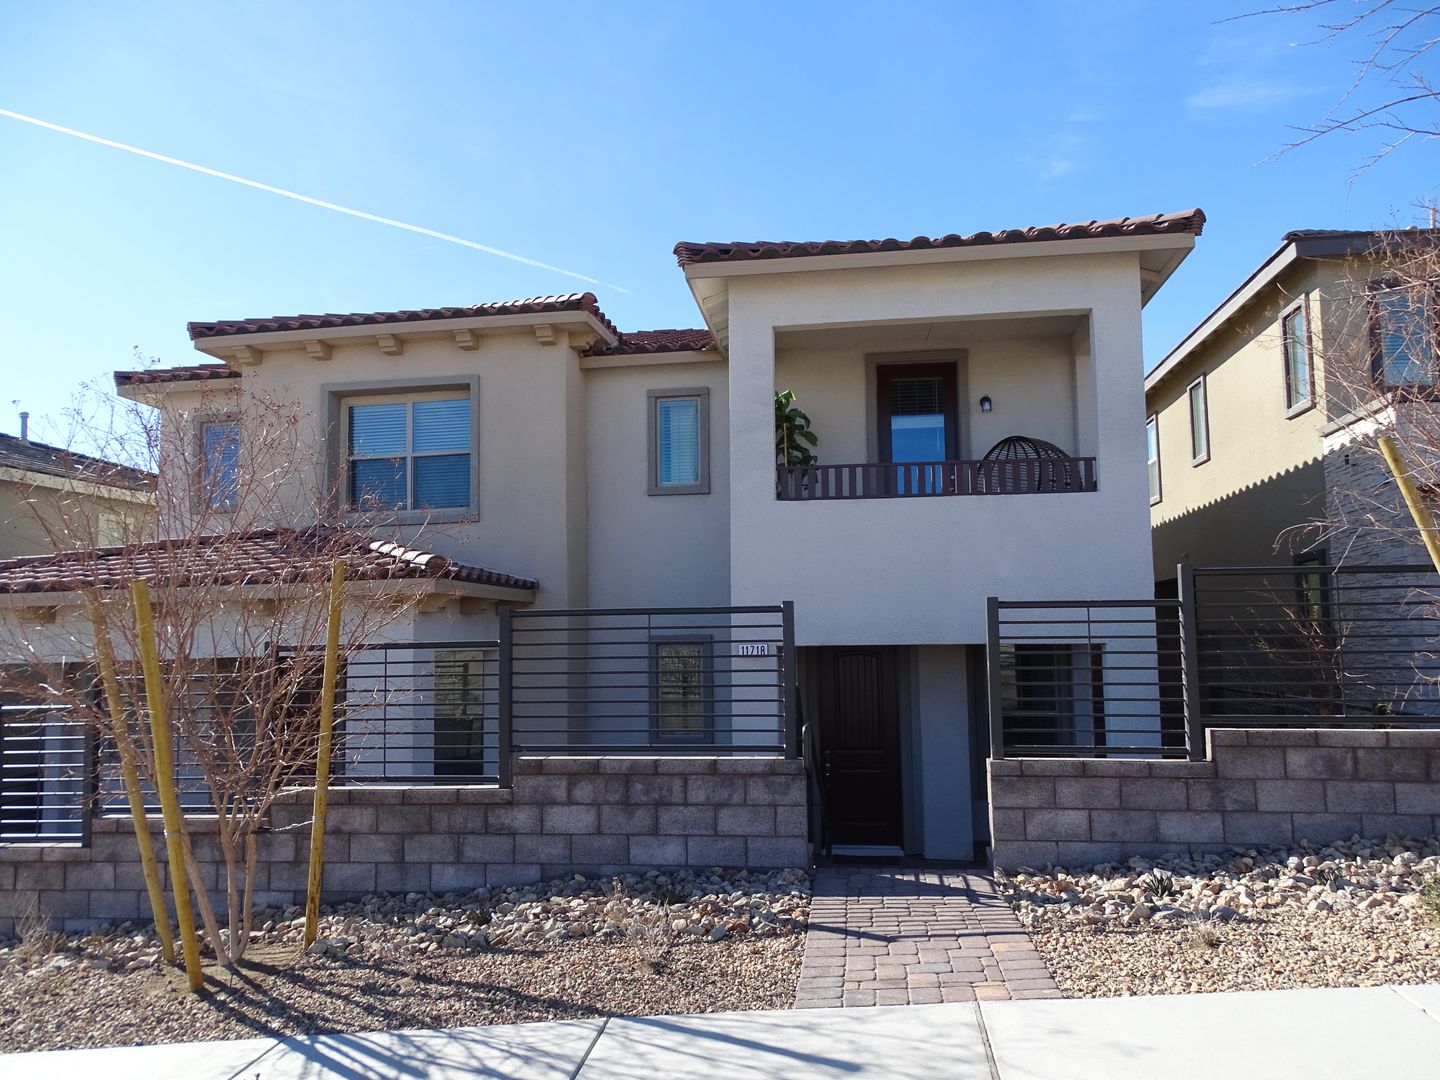 Nicely Upgraded 3 Bedroom Summerlin Townhome